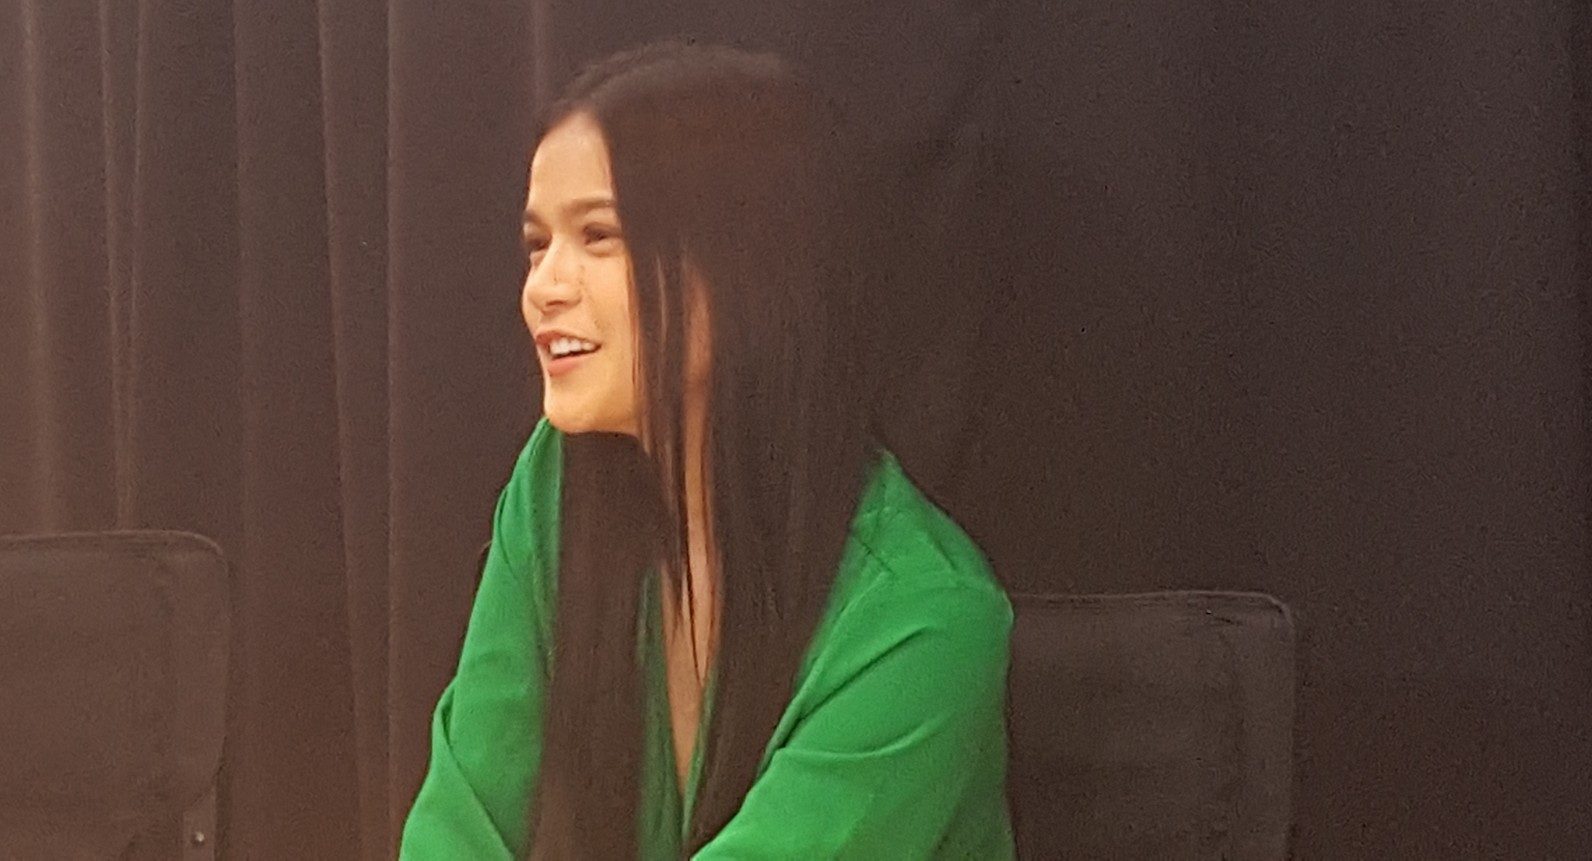 Vlogging is a challenge, says Maris Racal